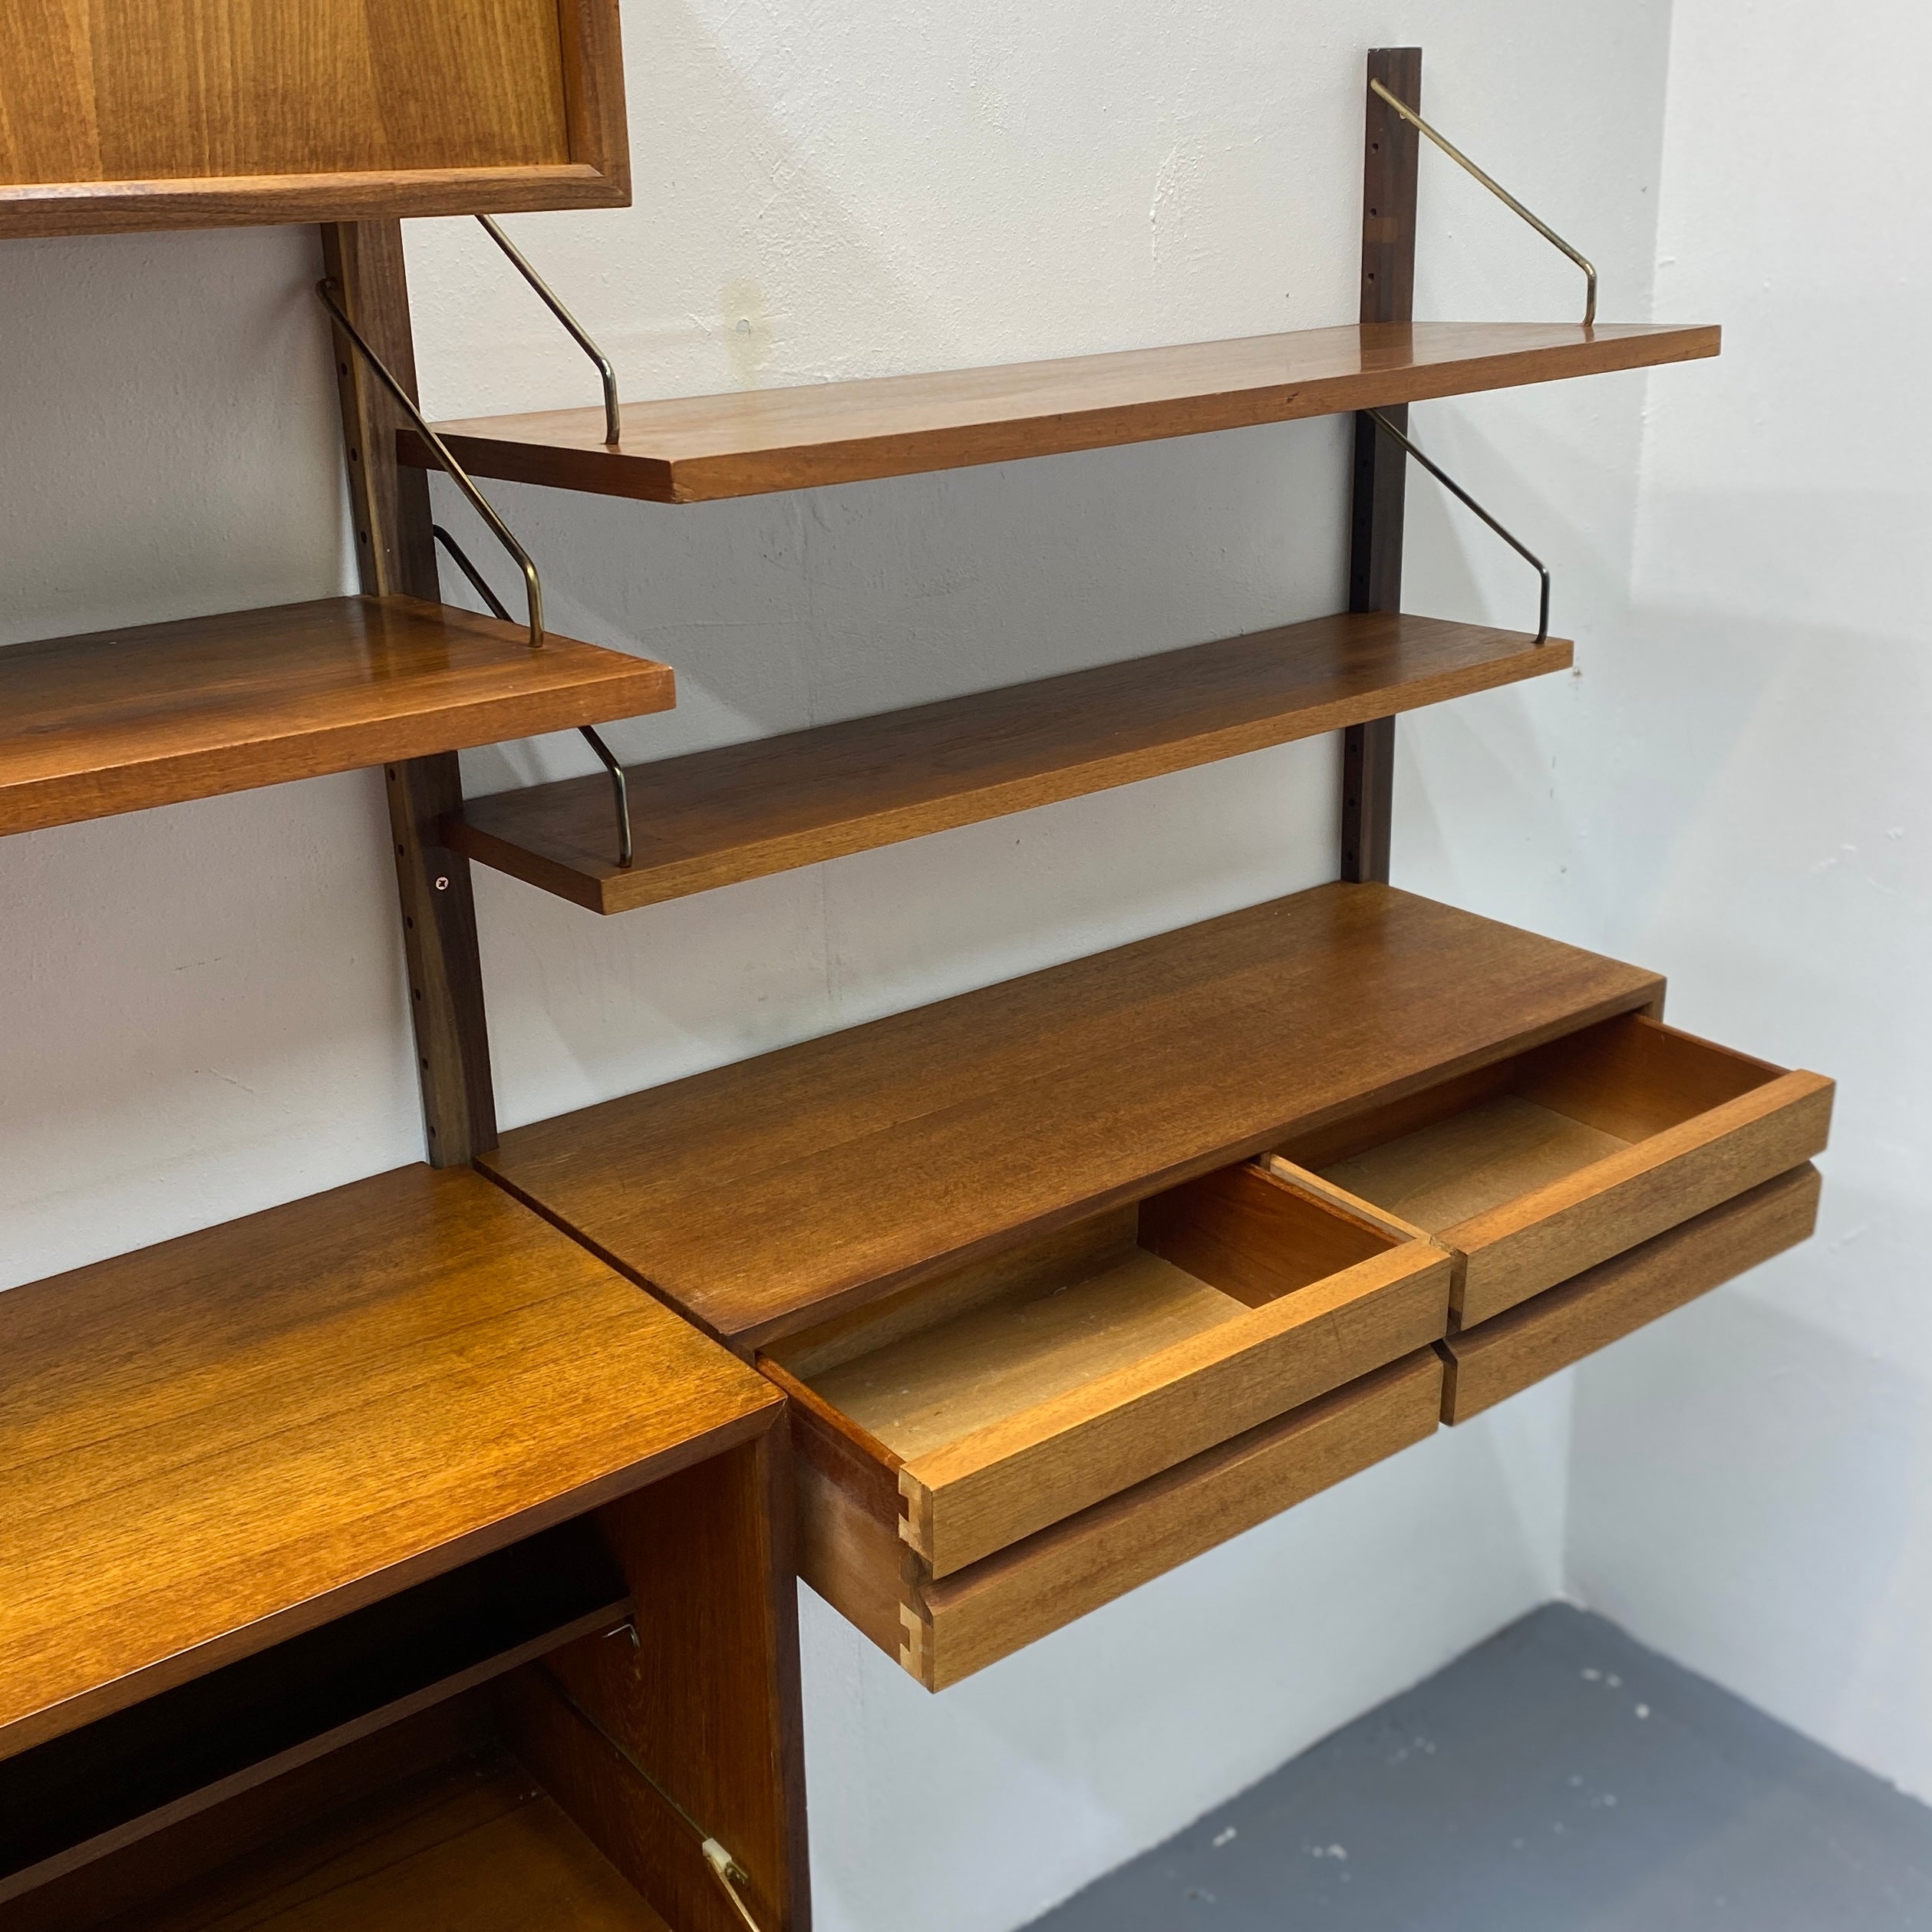 Wall System Storage Shelving